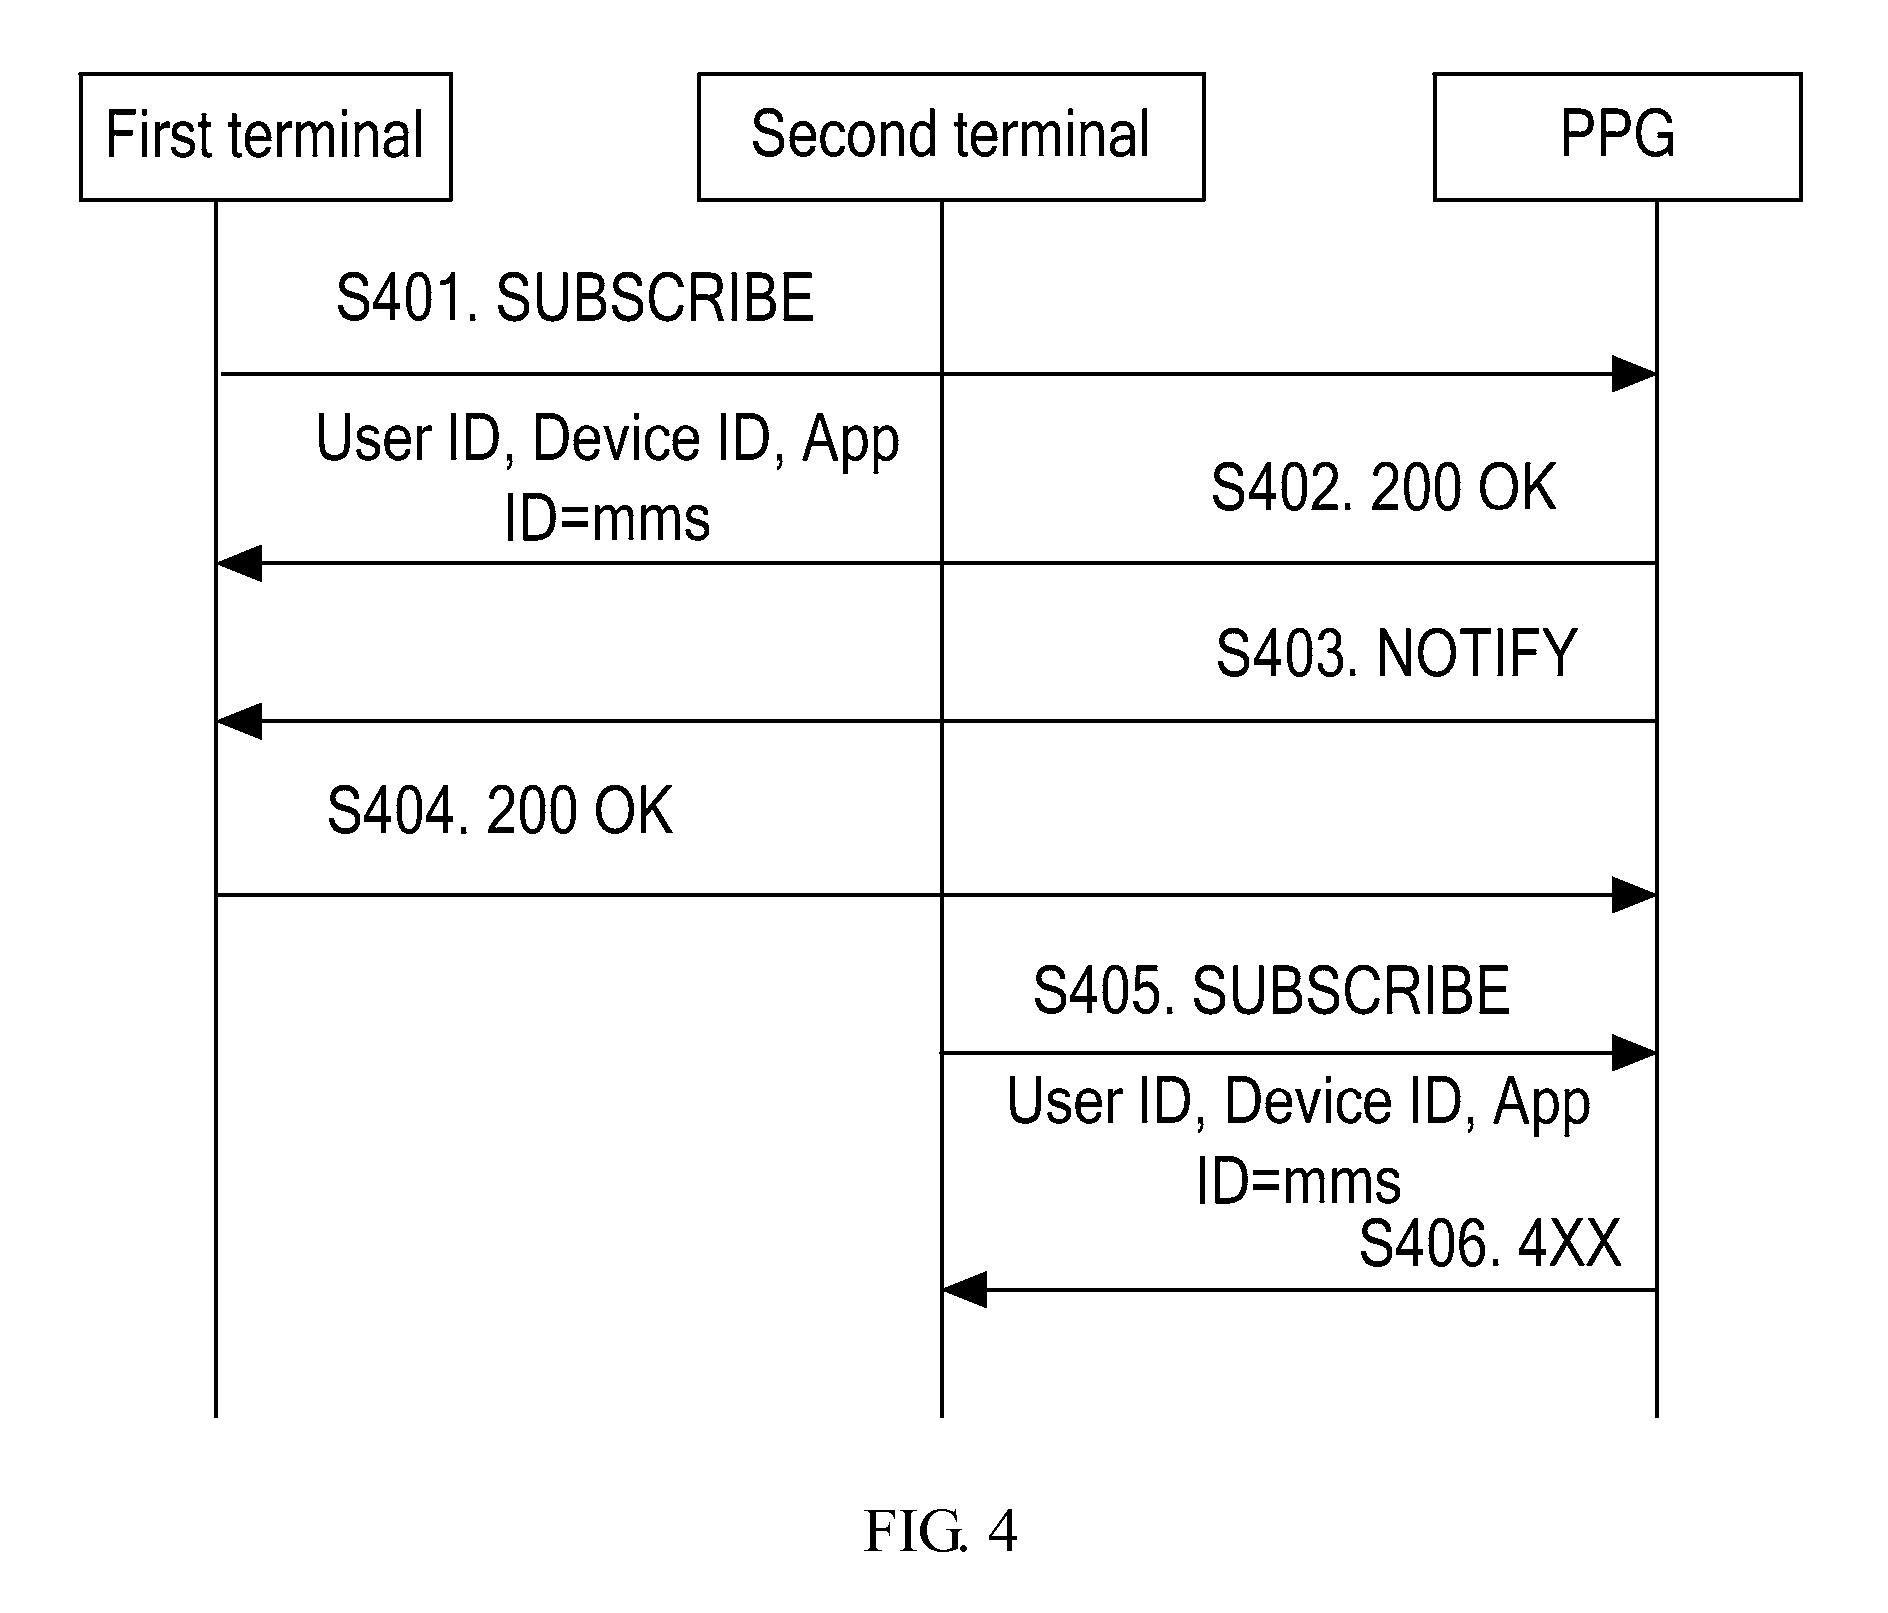 Method, system, and apparatus for processing a service message with a plurality of terminals